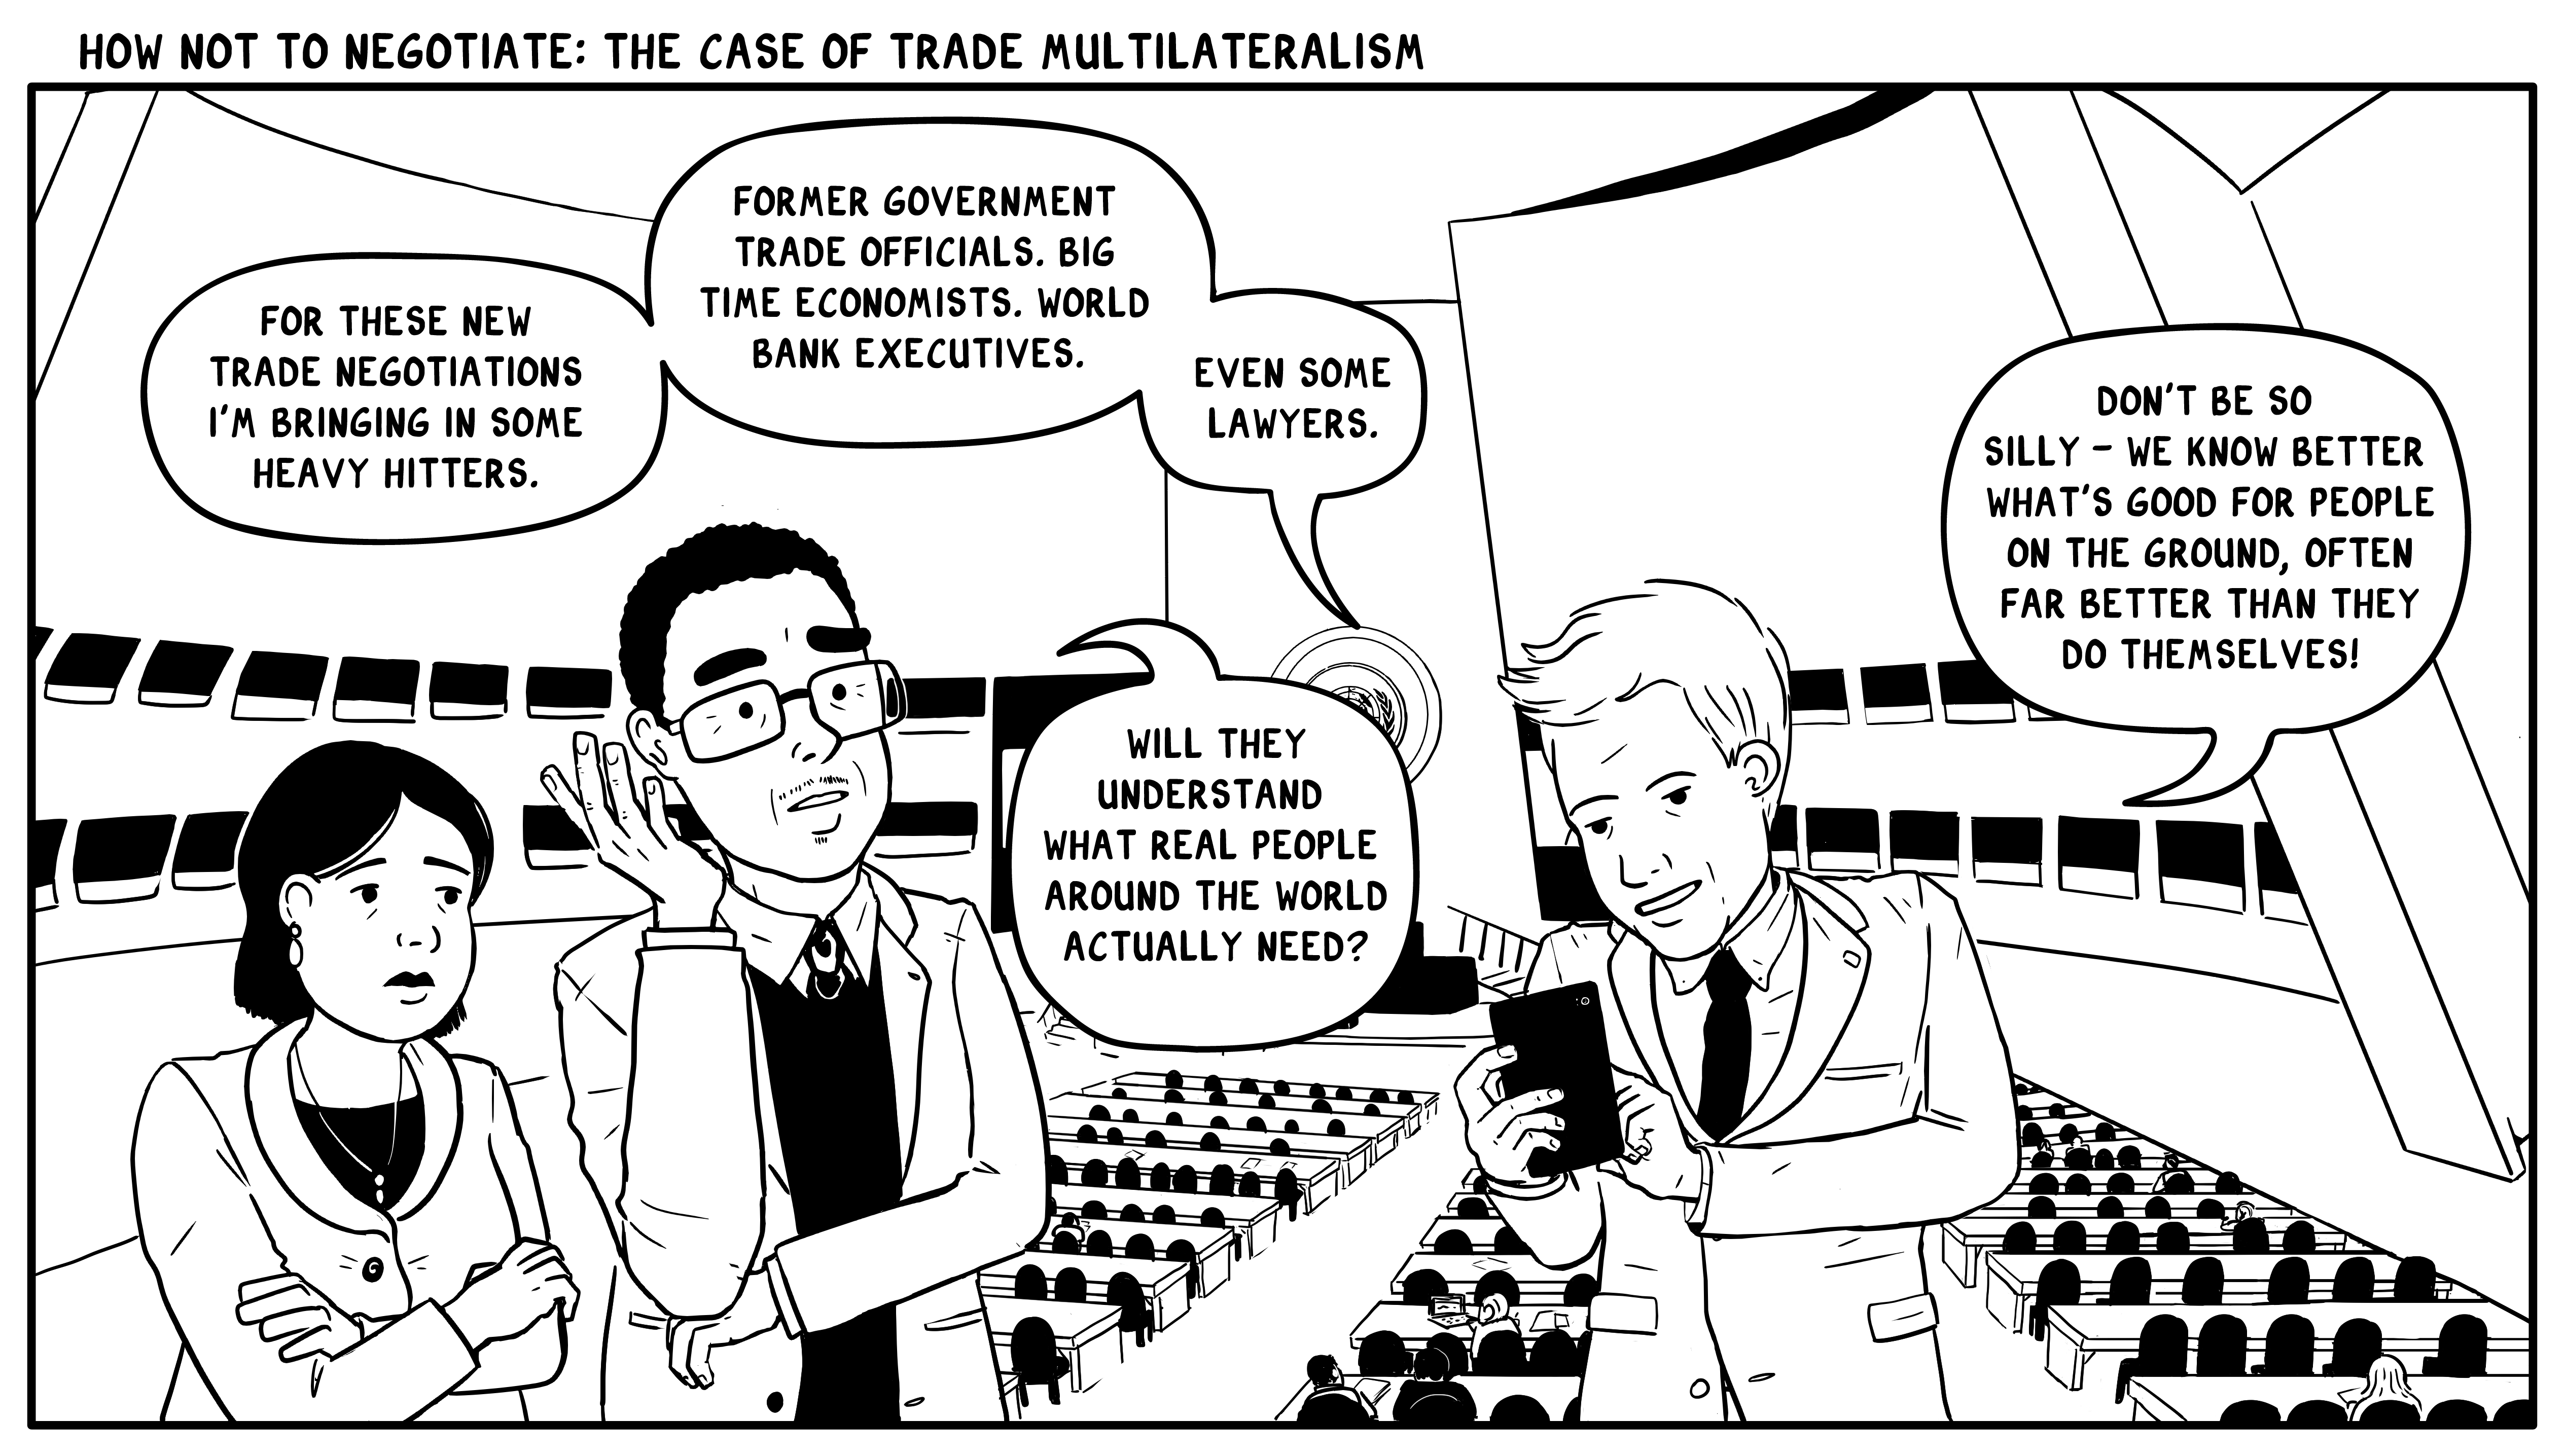 How not to negotiate: the case of trade multilateralism